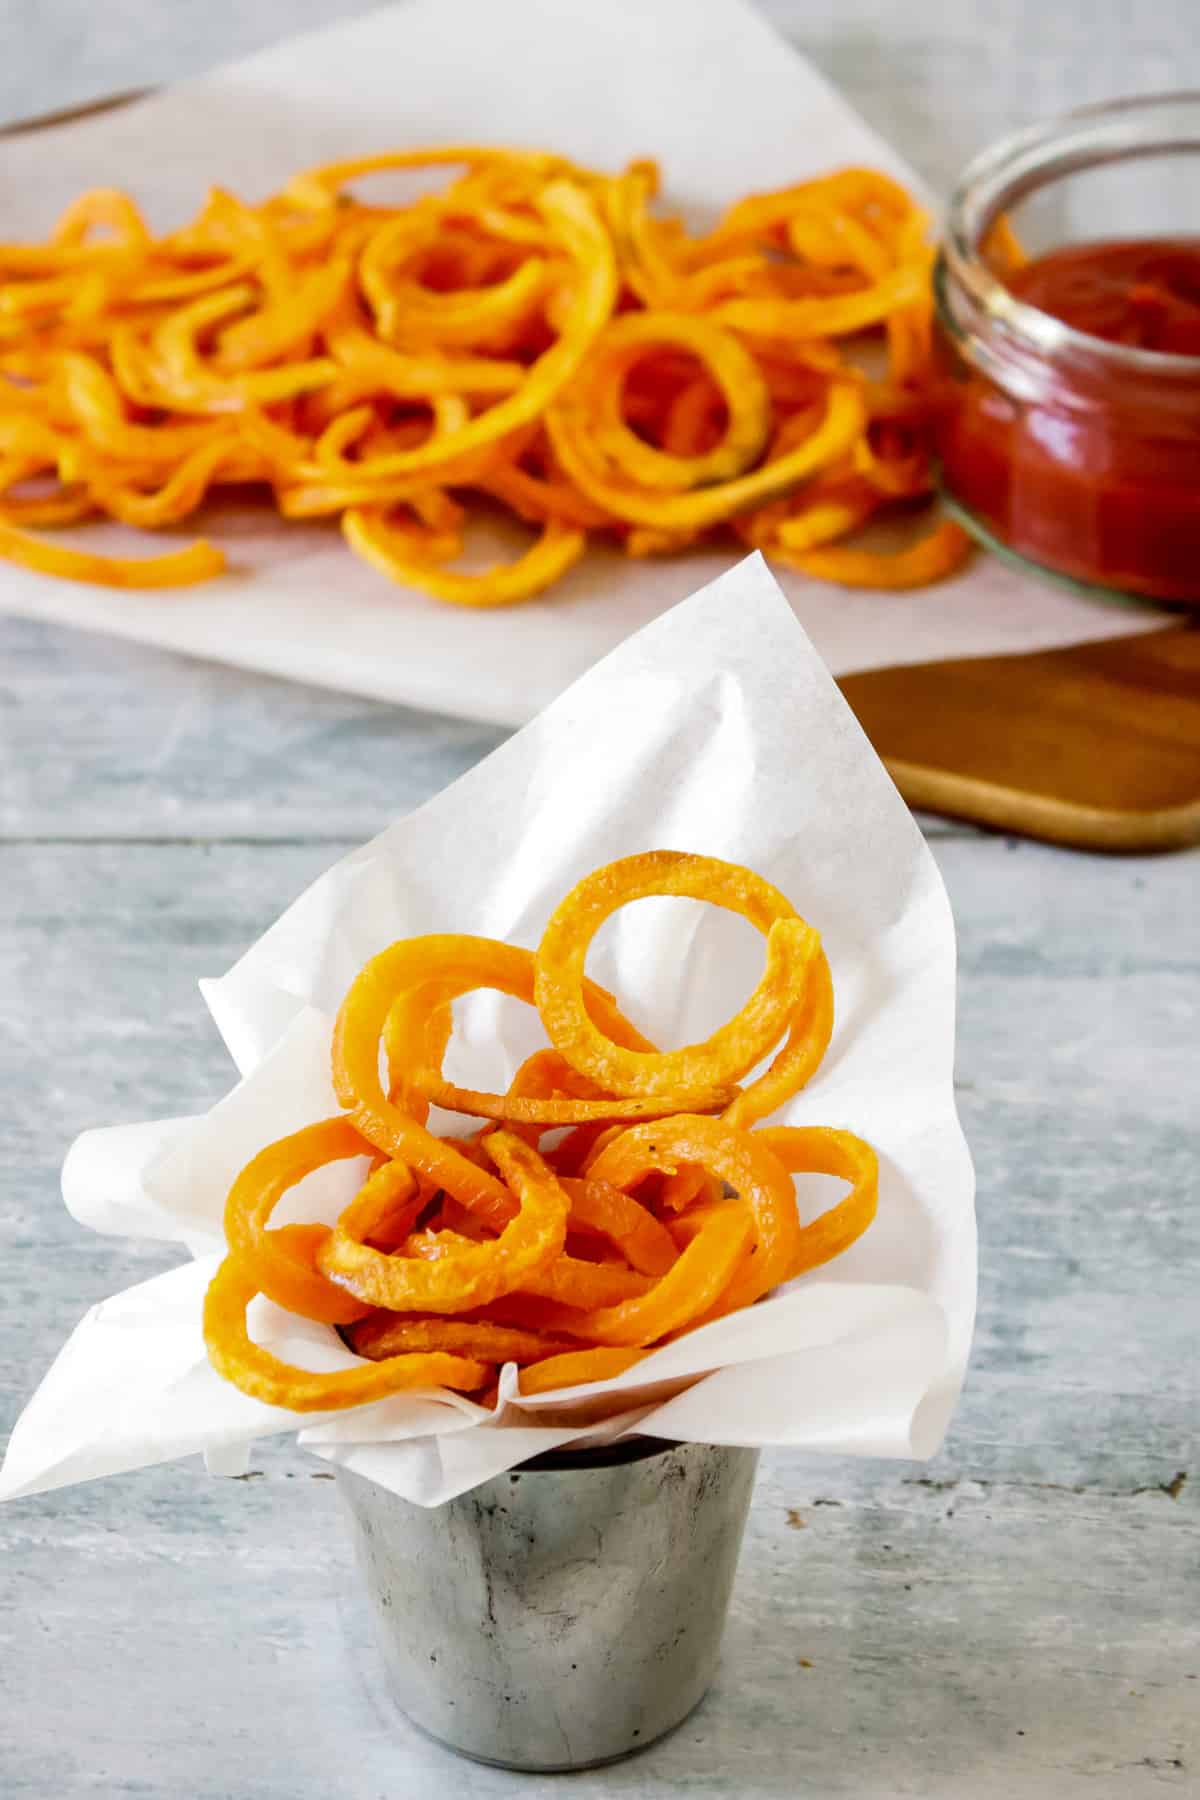 Table with a dish of spiralized sweet potato fries, plus a tray of them behind and a dish of ketchup.